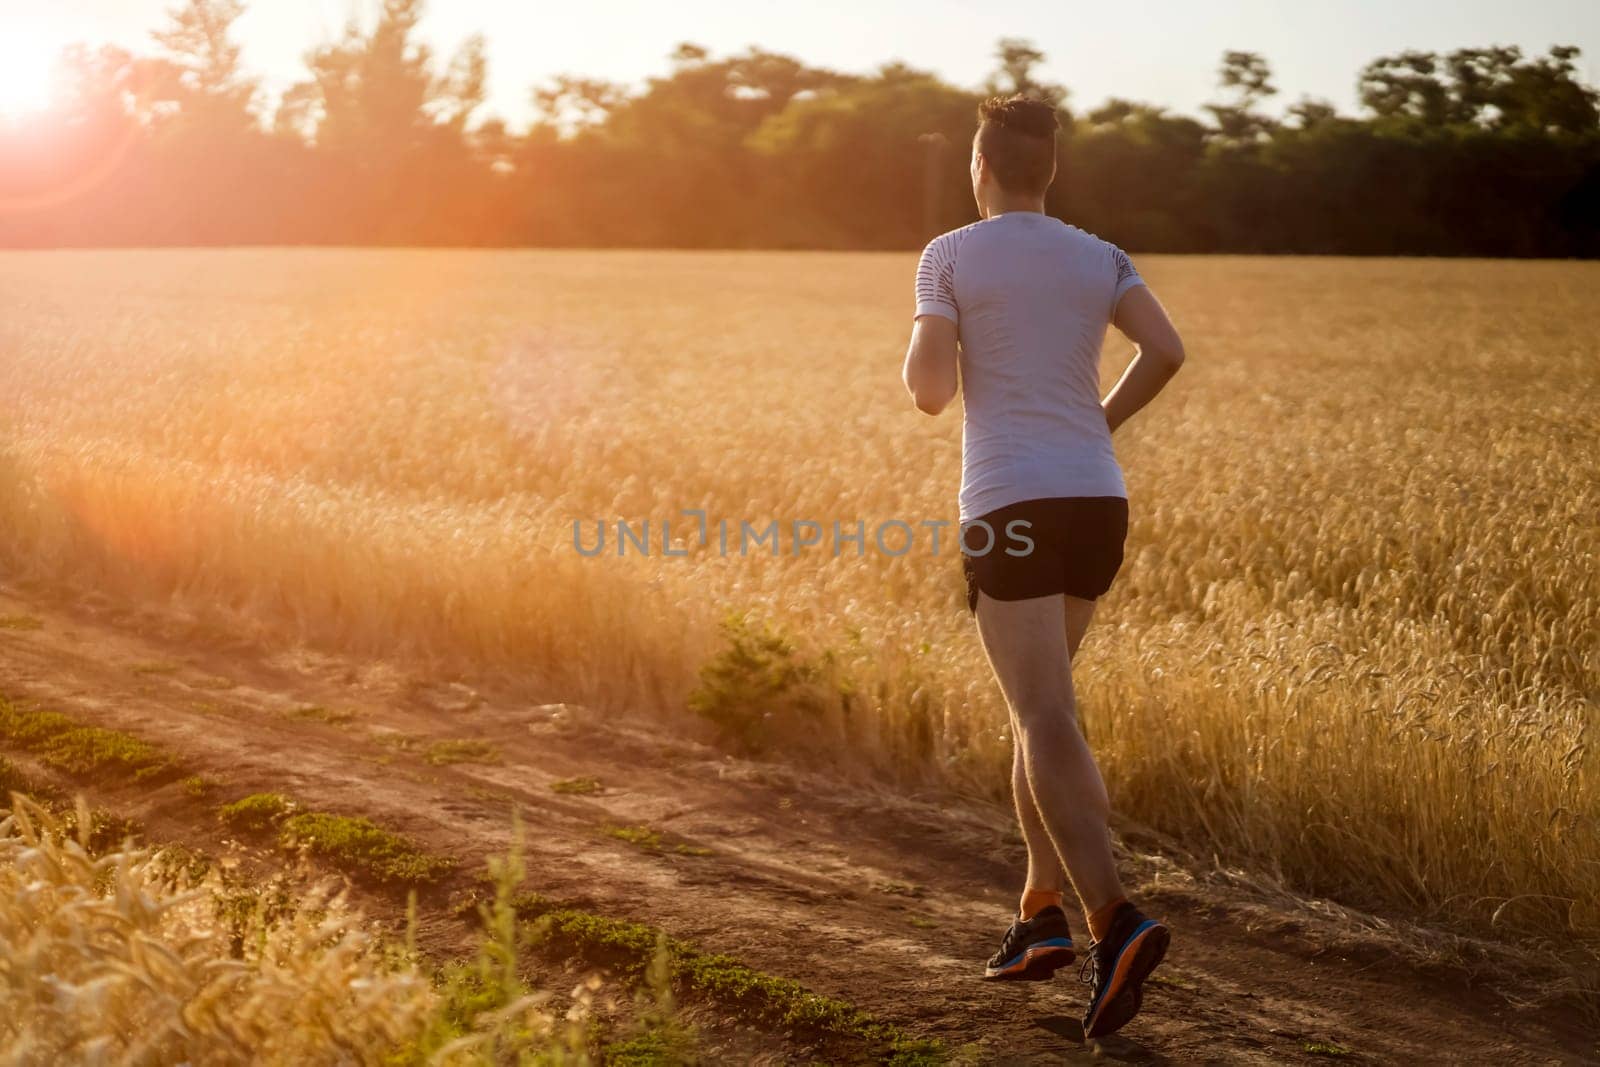 An athletic man jogging along the trails in a wheat field outside the city at sunset, a runner training in a picturesque outdoor area.